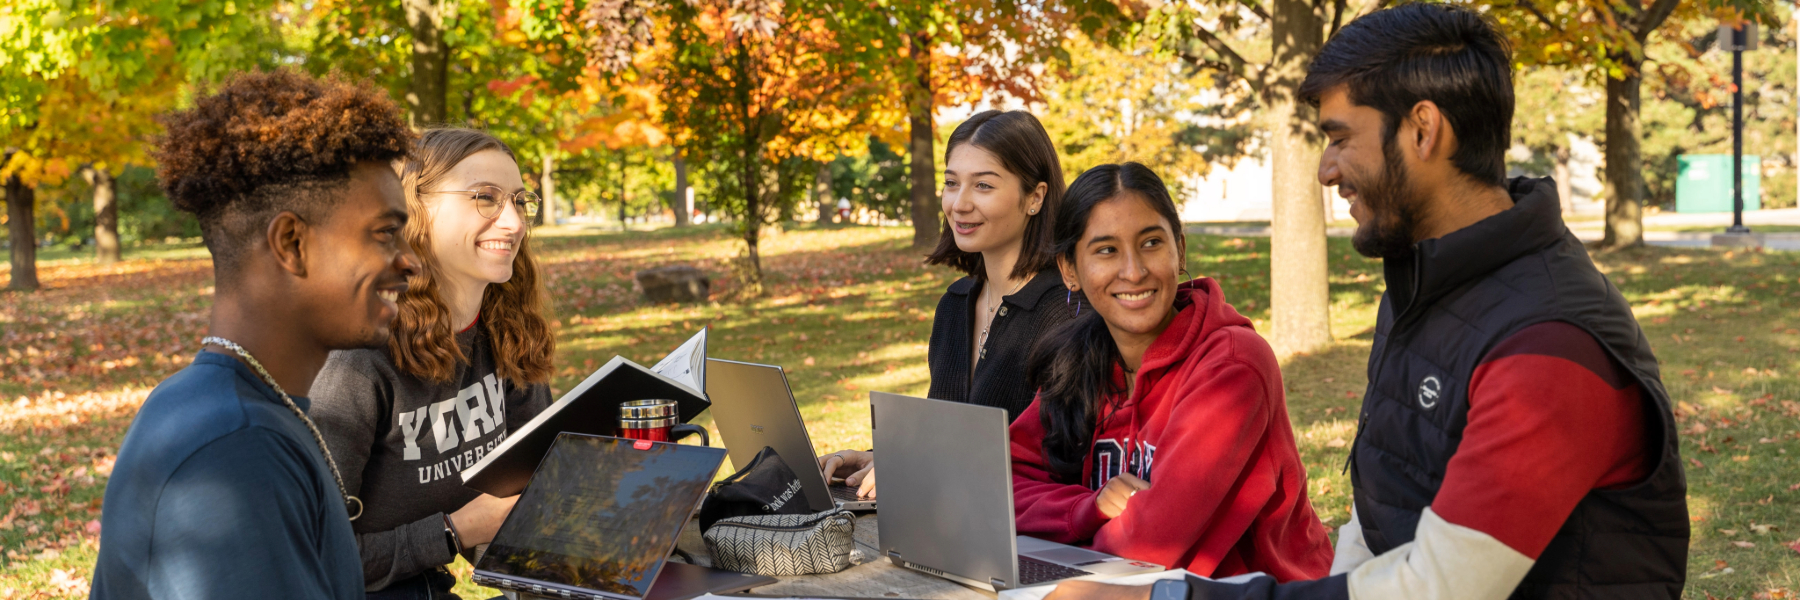 Students sitting at outdoor picnic table